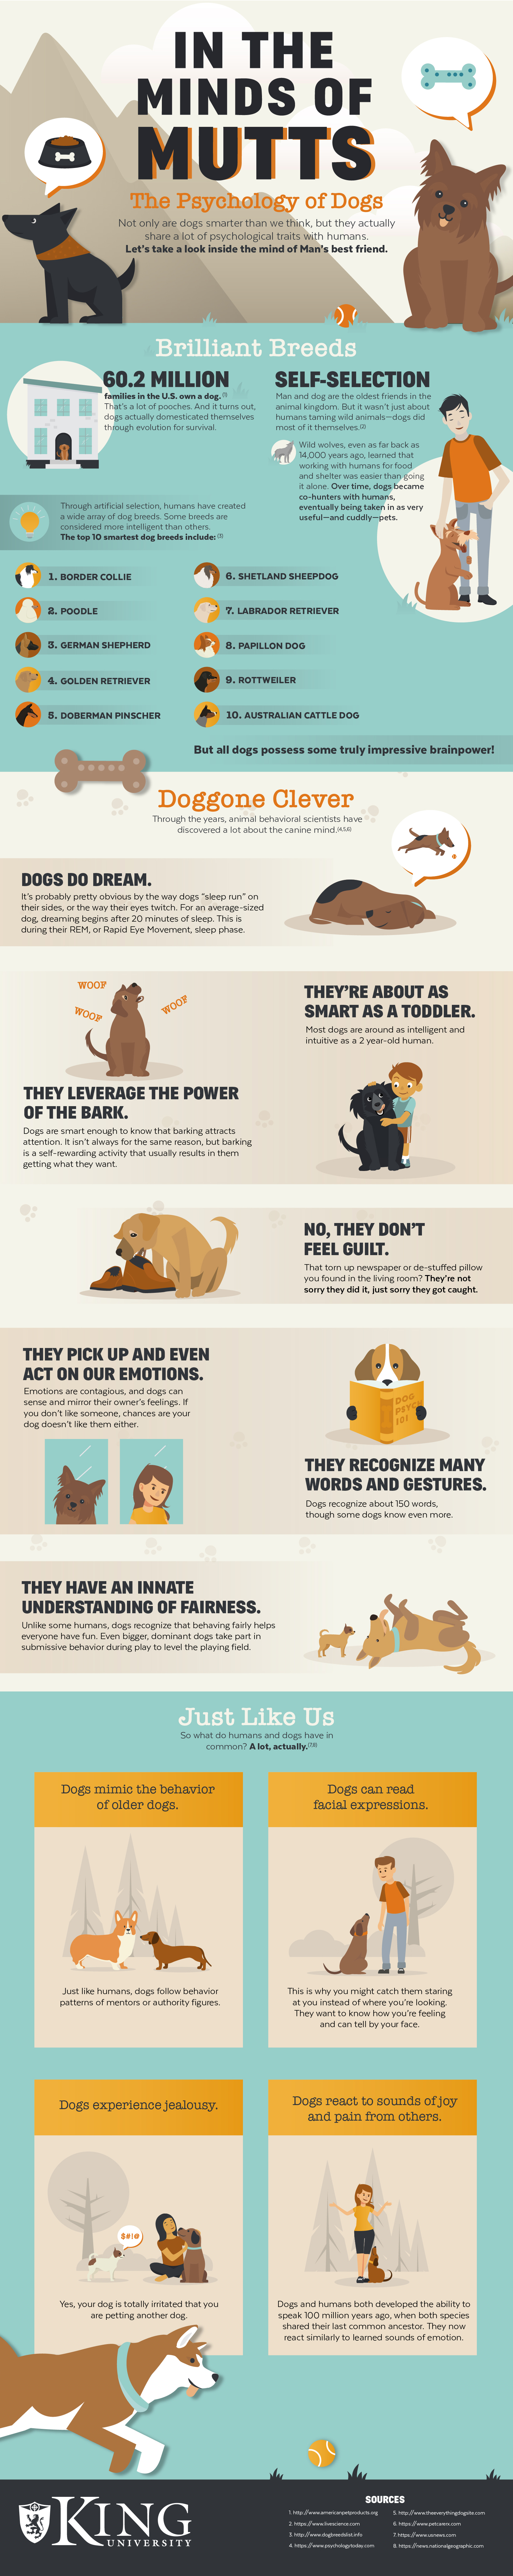 Why Dogs are Man’s Best Friends: The Psychology of Dogs - Infographic